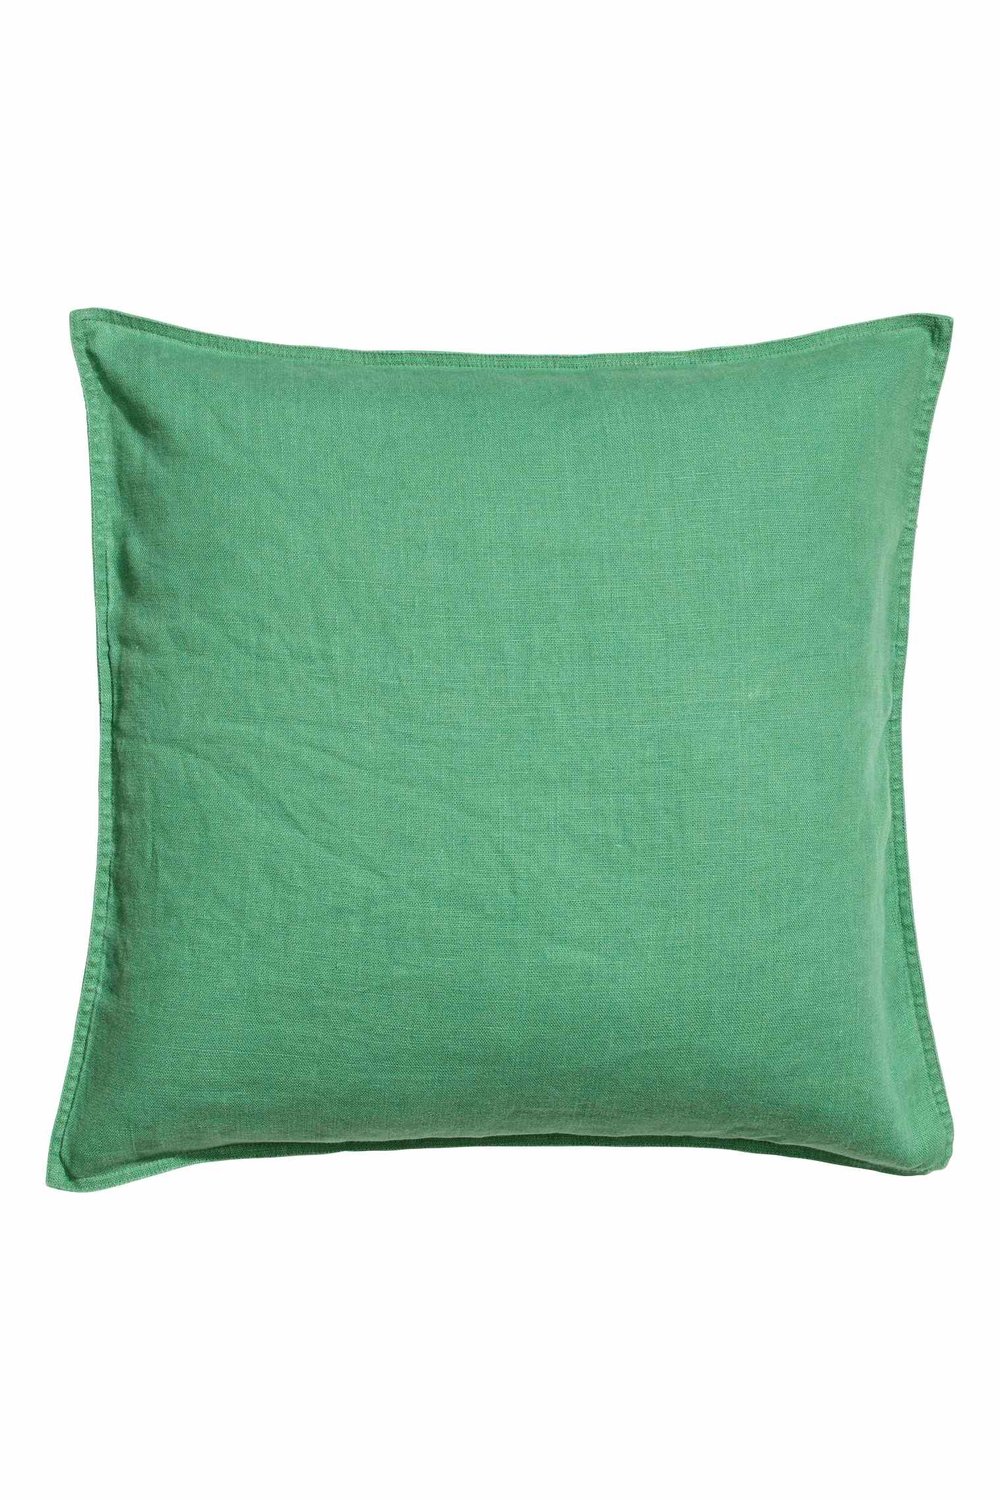 Linen cushion cover  20in., $15